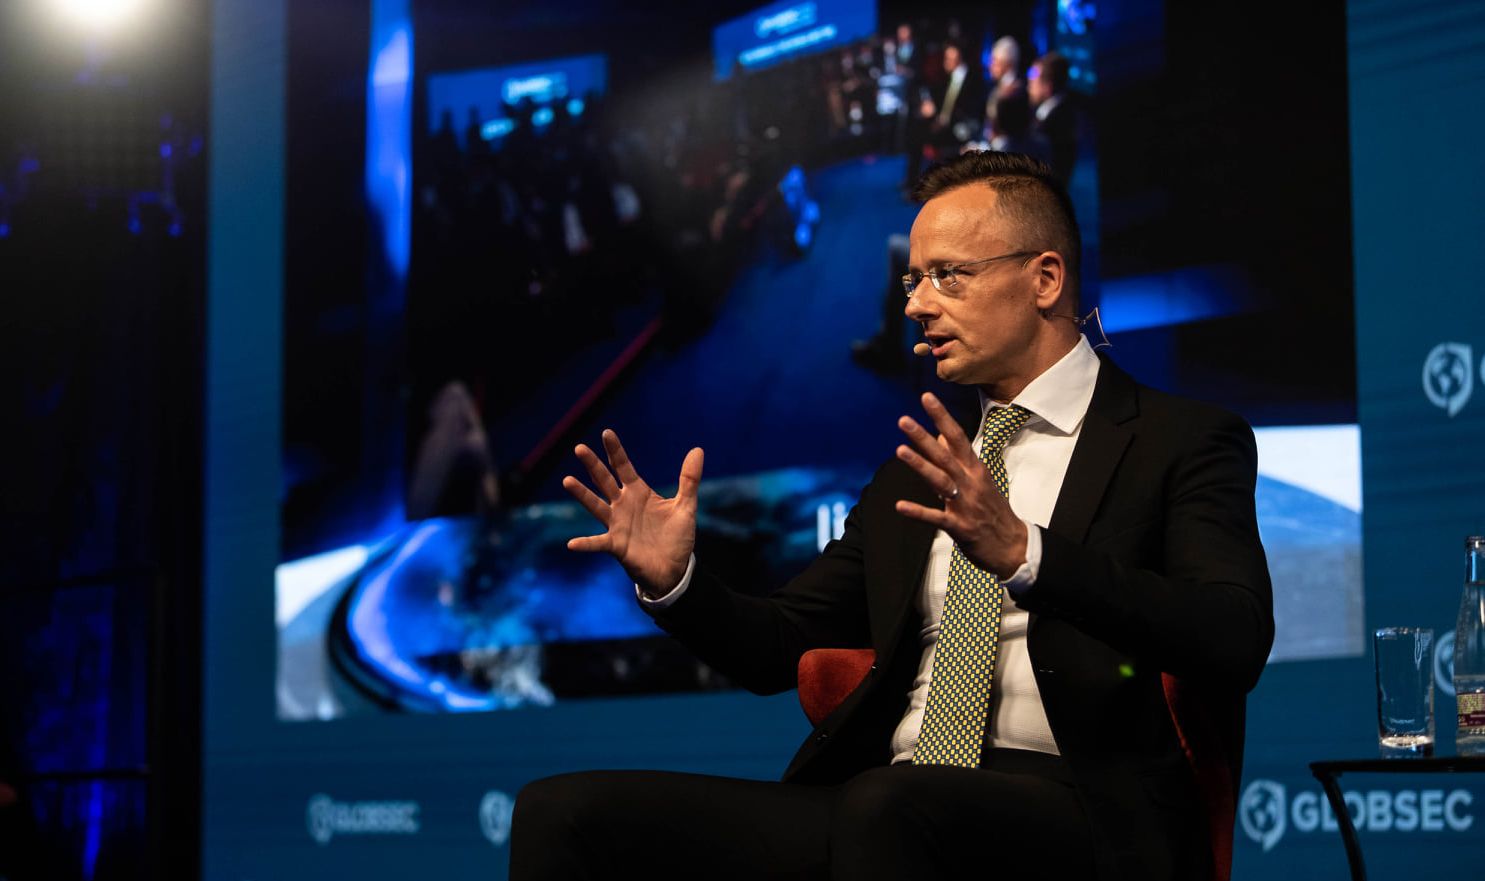 Foreign Minister: Hungary Intelligence Services Doing Utmost Against Cyber-Attacks